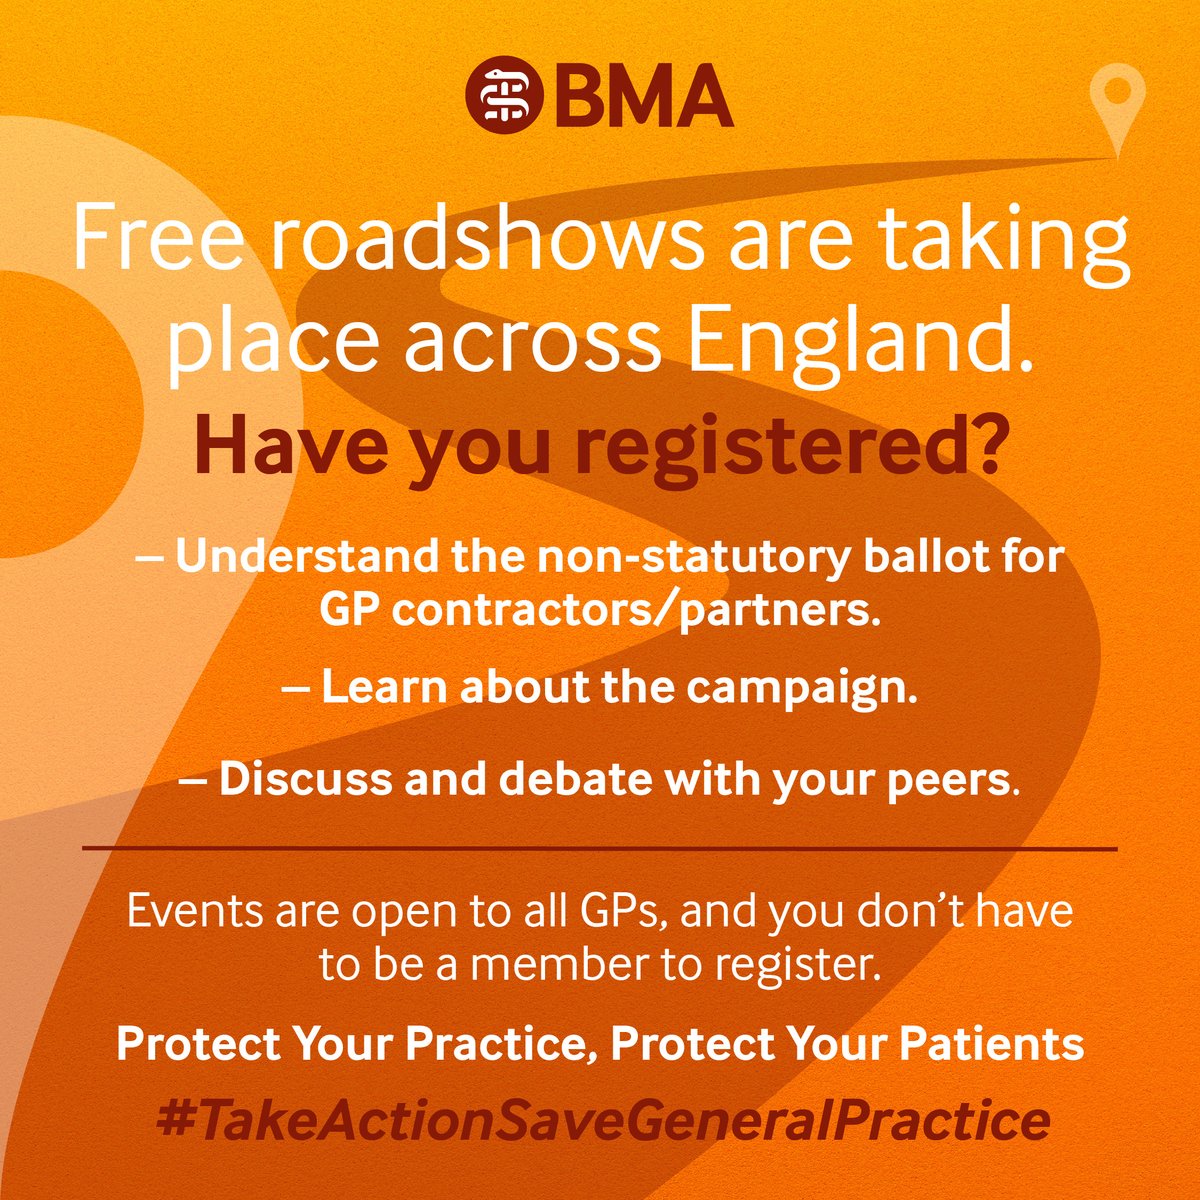 Make sure you're well informed about the non-statutory ballot for GP partners & contractors. Roadshows are happening across England from 5 June - 24 July. They're free and you don't have to be a member. #TakeActionSaveGeneralPractice bma.org.uk/GProadshows